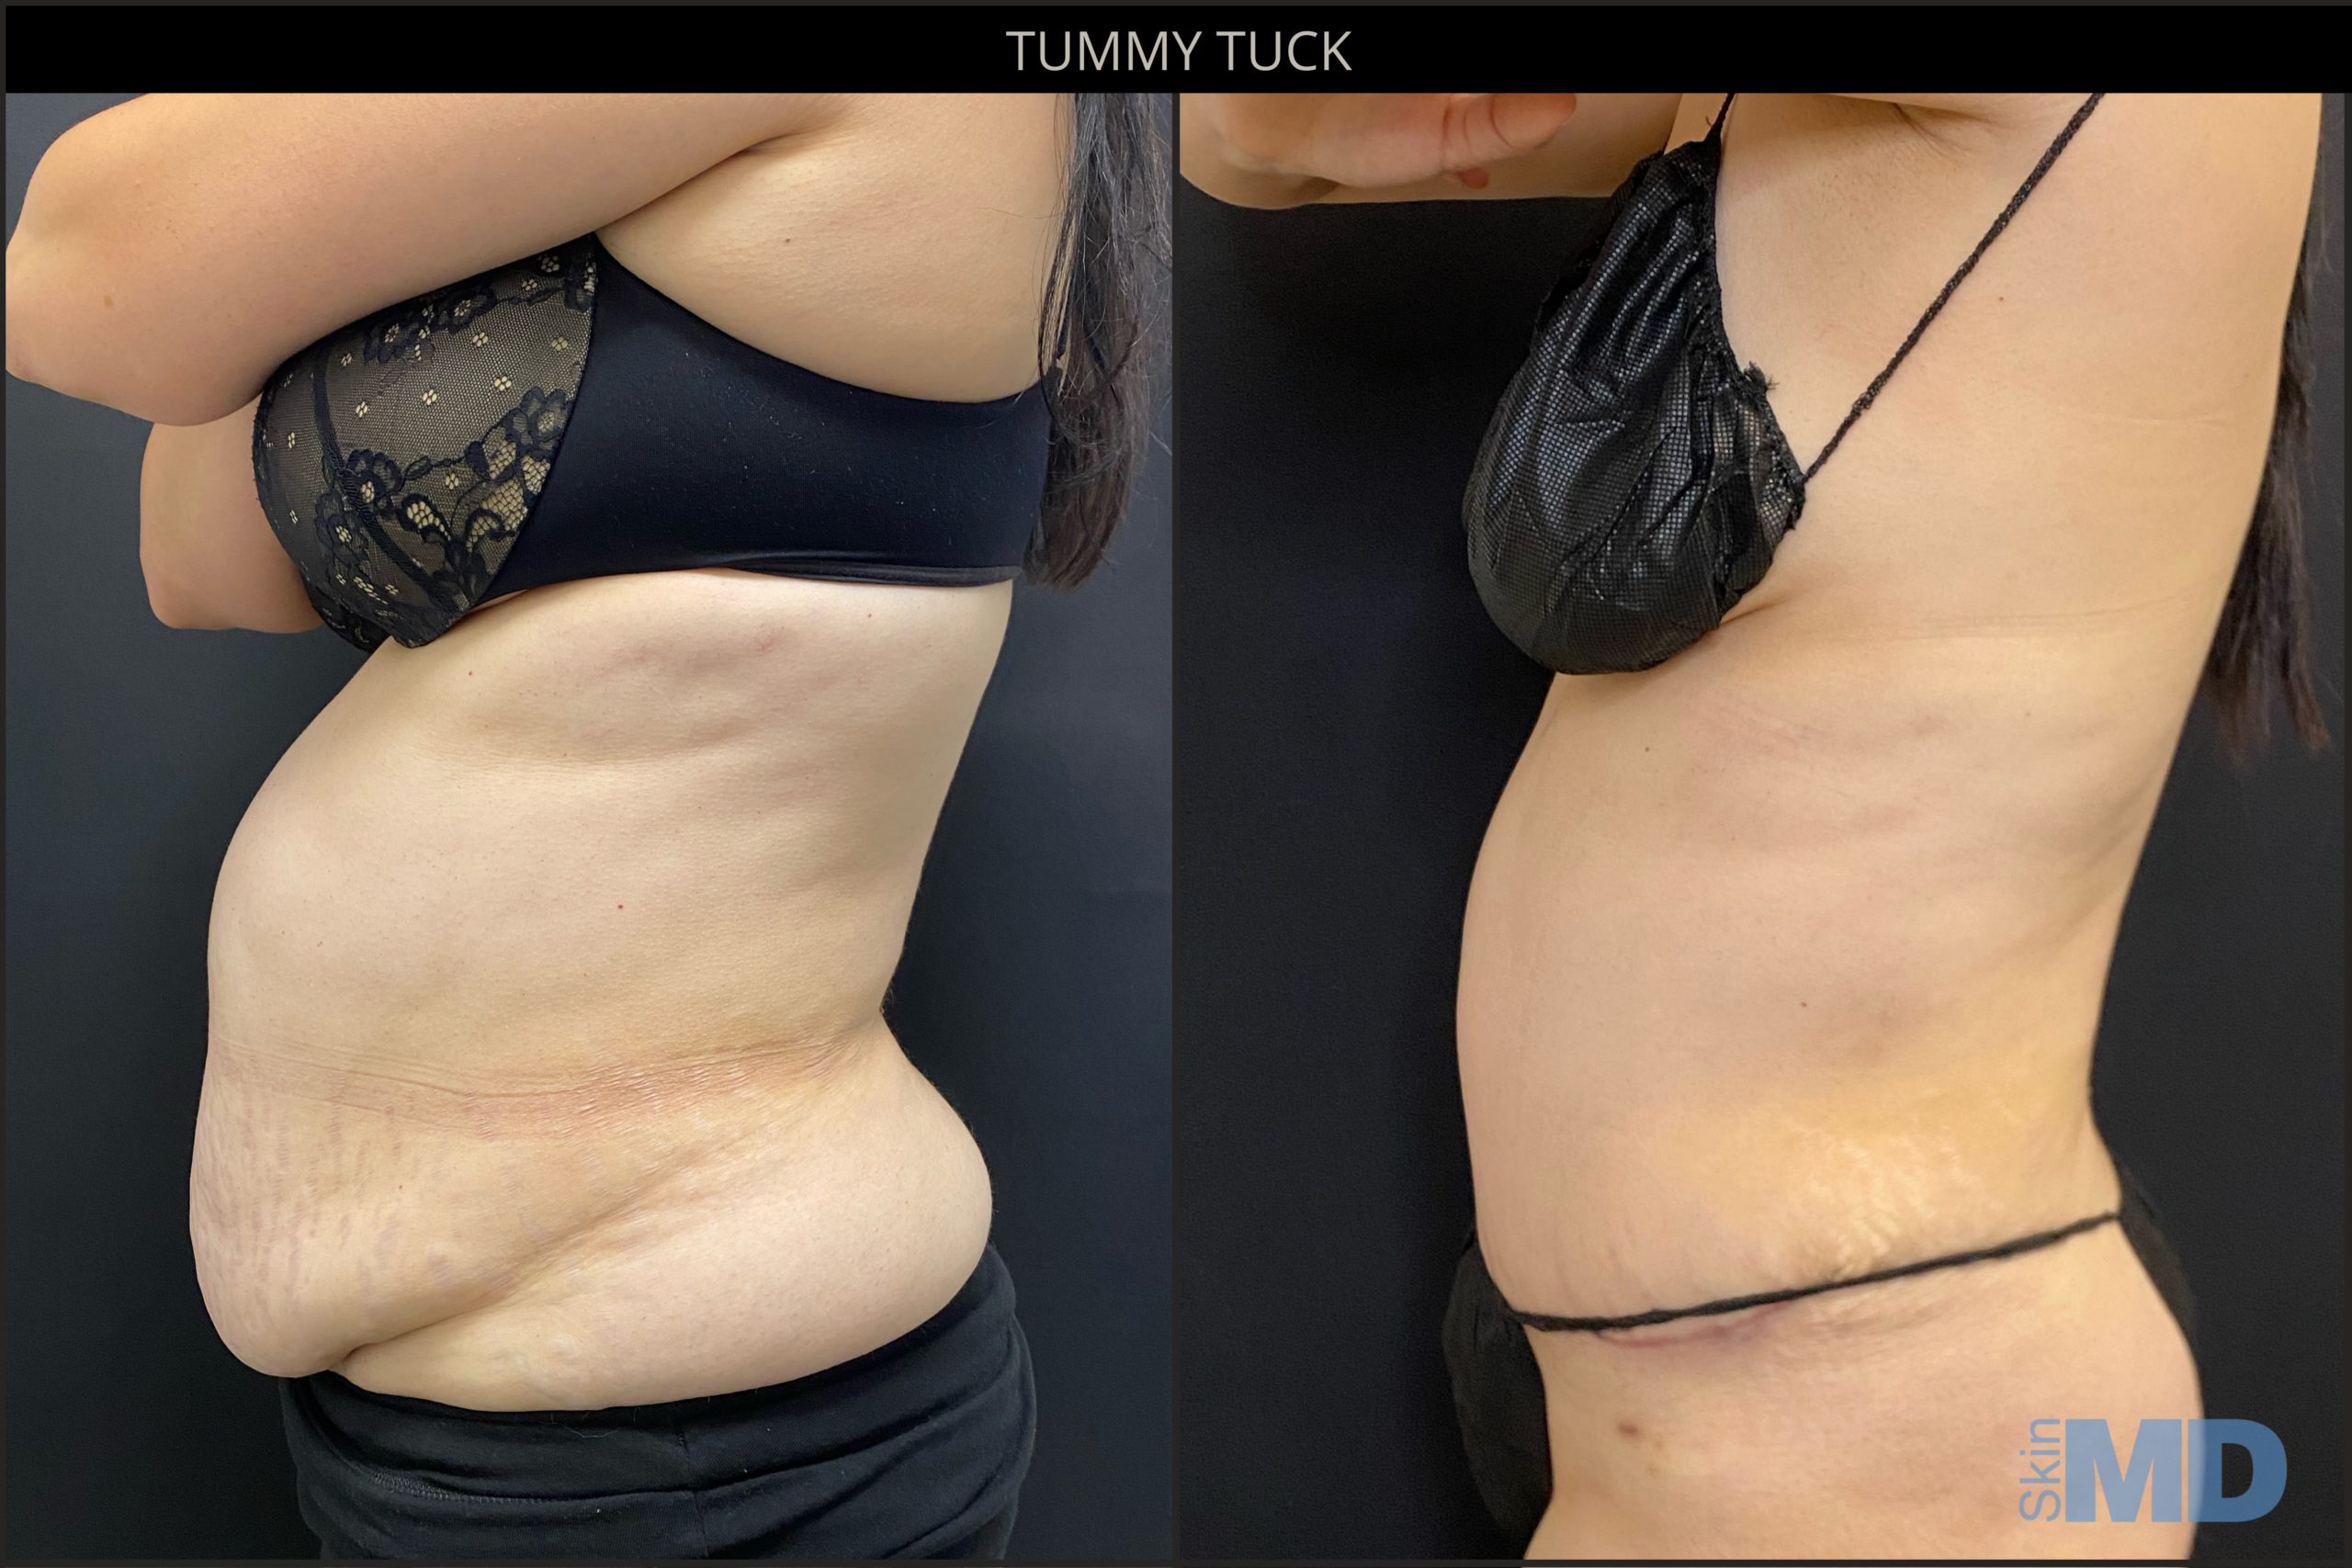 Before and after Tummy Tuck results